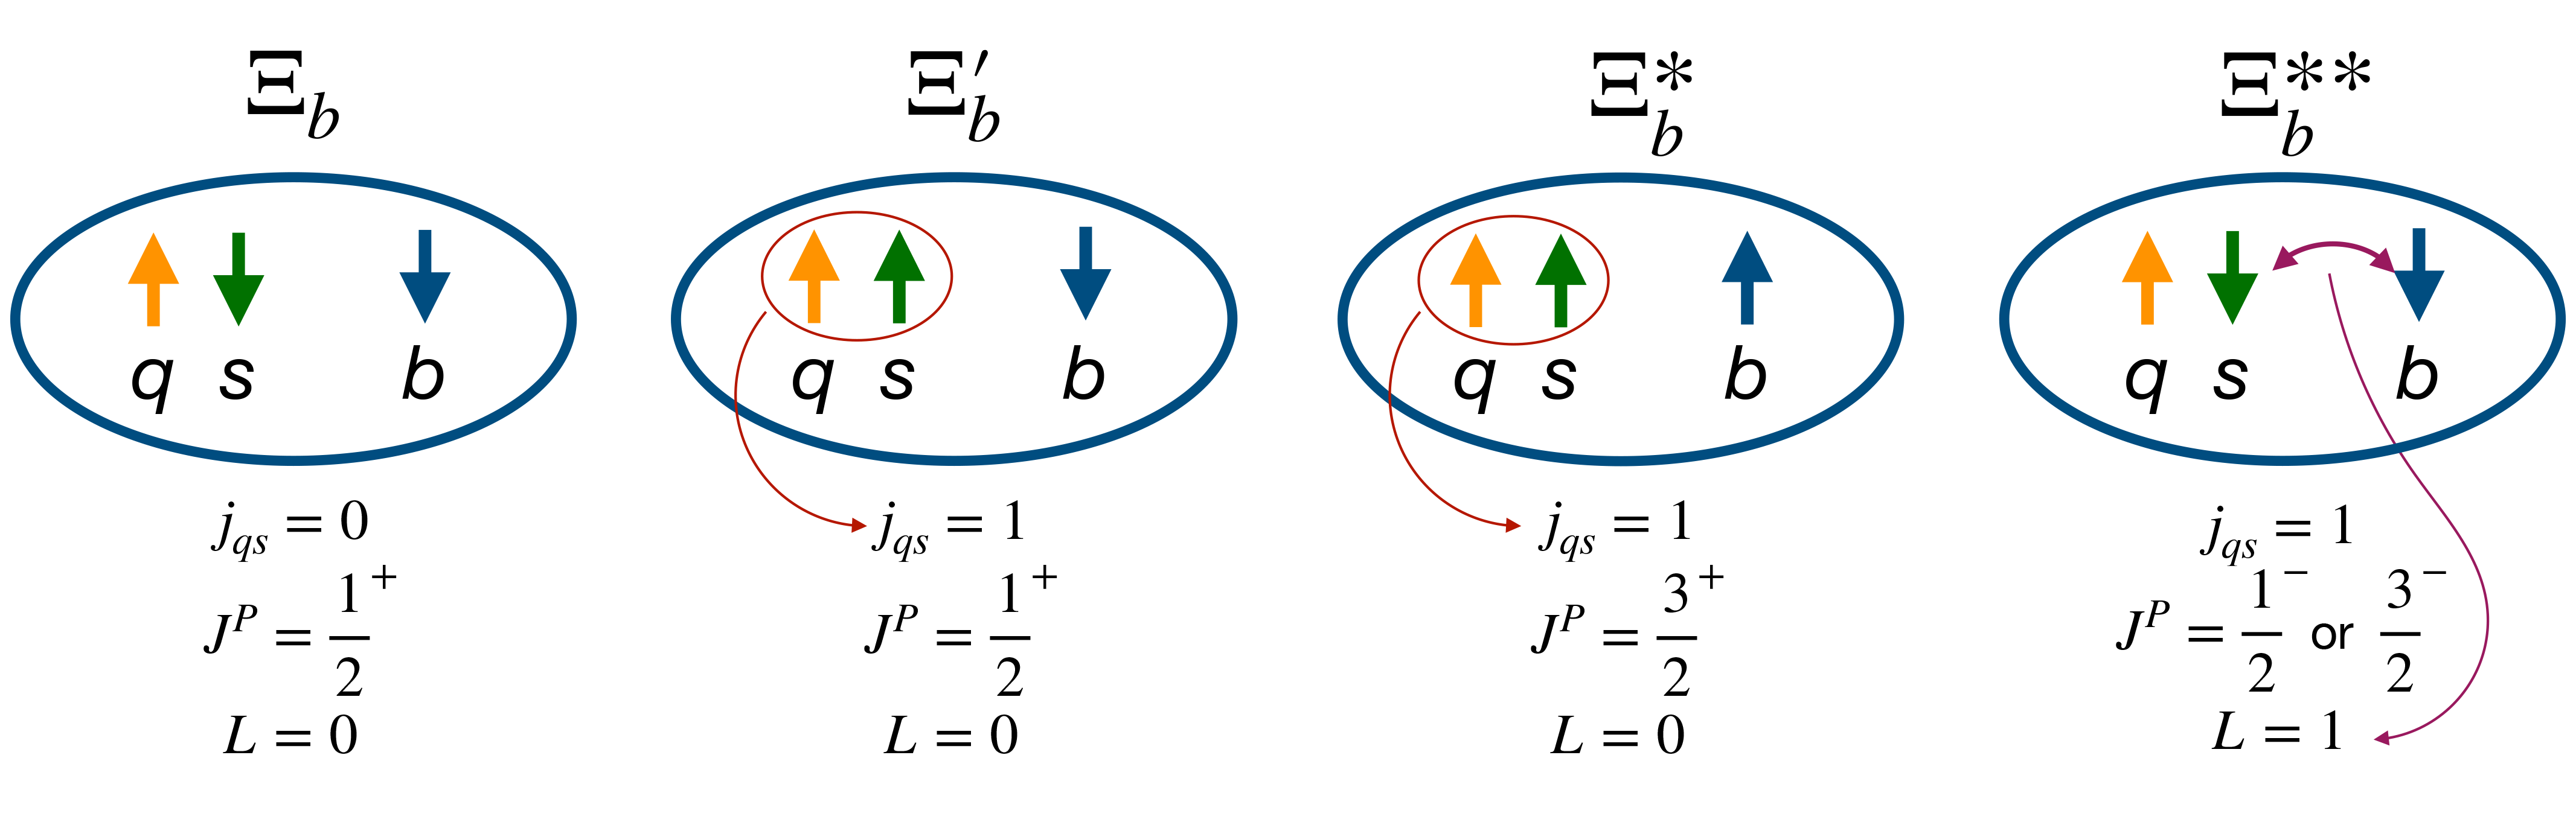 same quark content can still create different mass in isodoublets